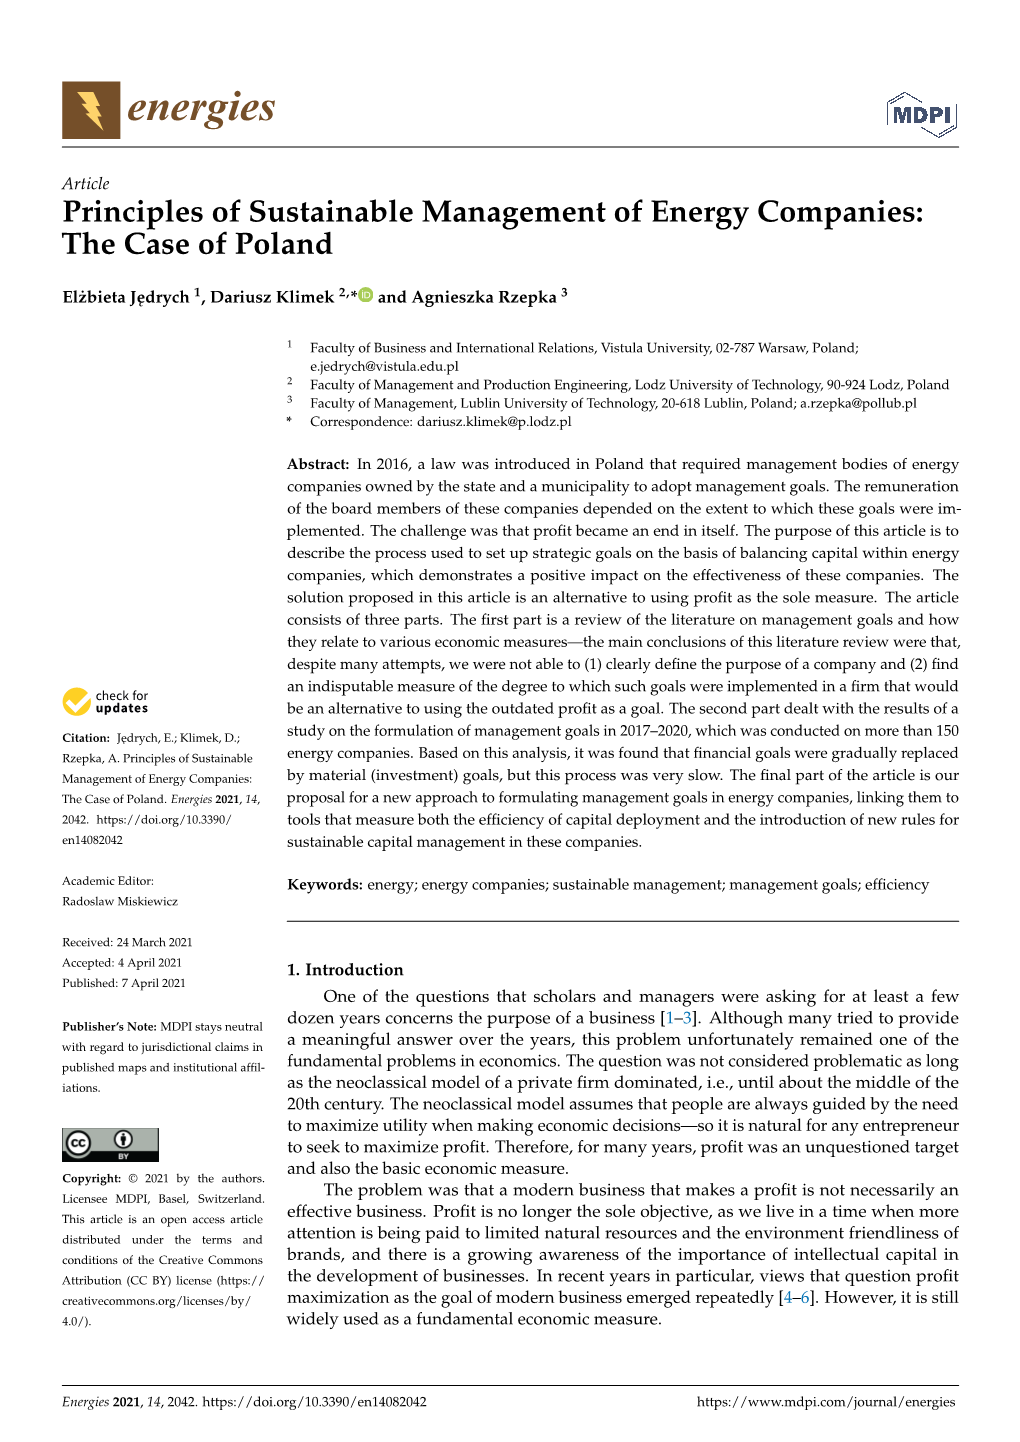 Principles of Sustainable Management of Energy Companies: the Case of Poland